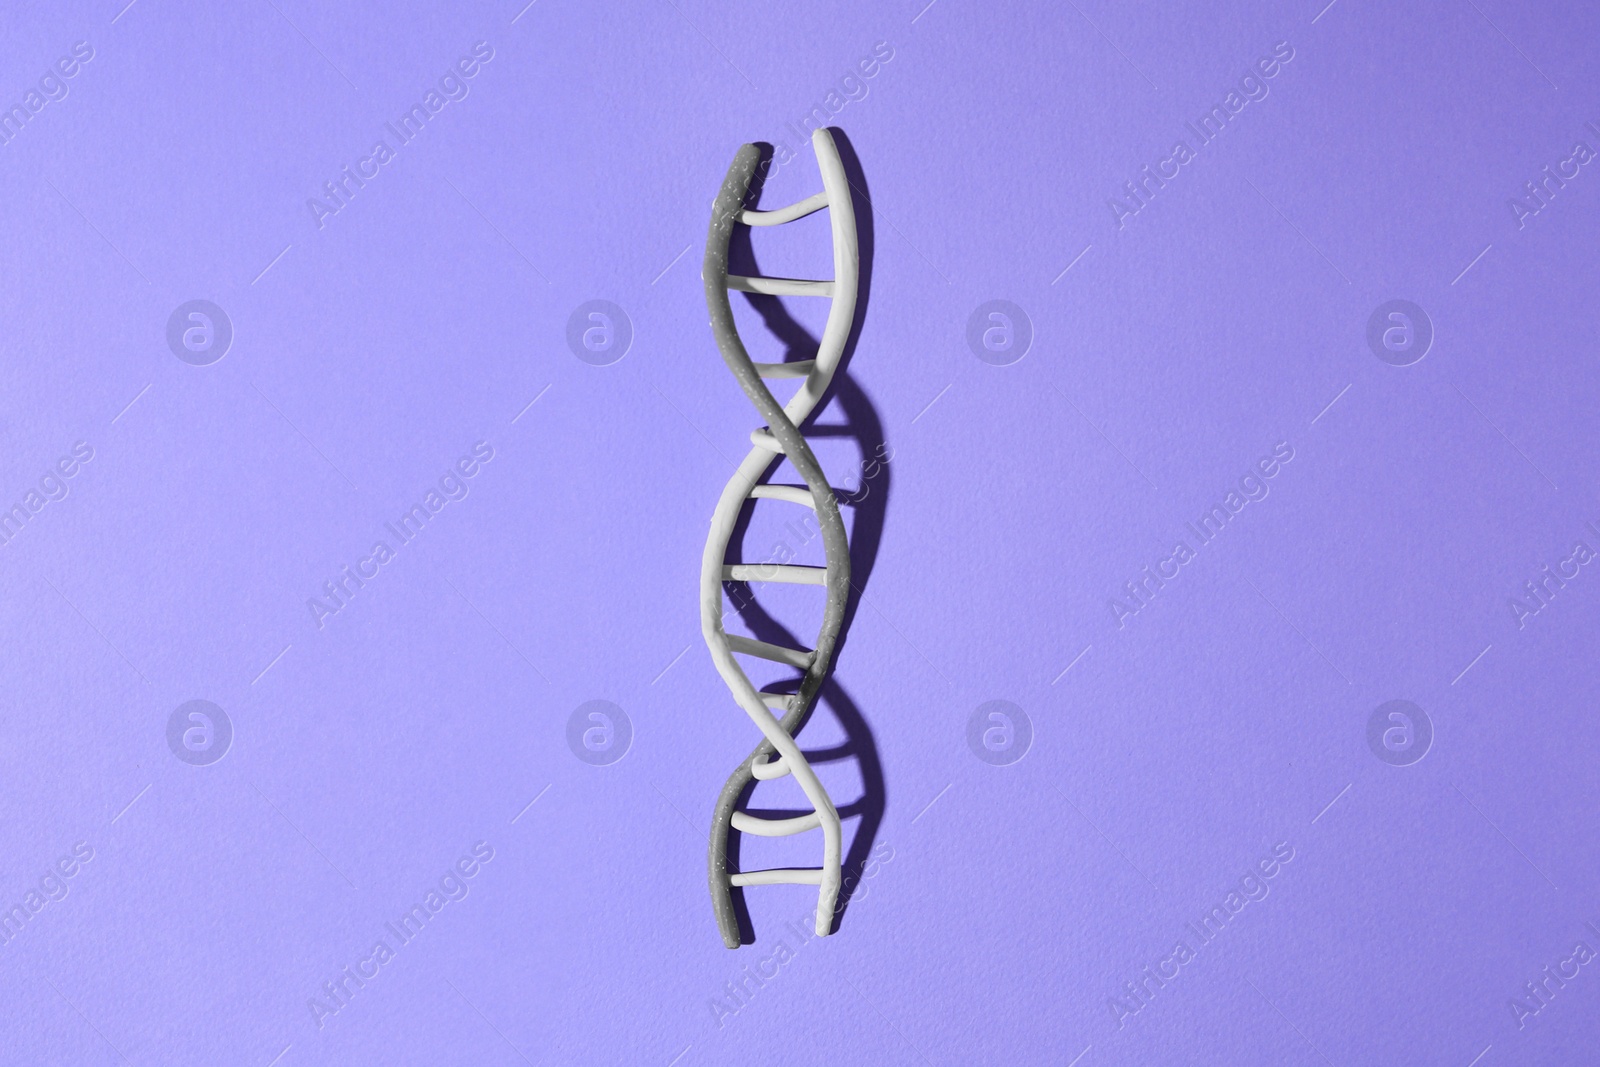 Photo of Plasticine model of DNA molecular chain on violet background, top view